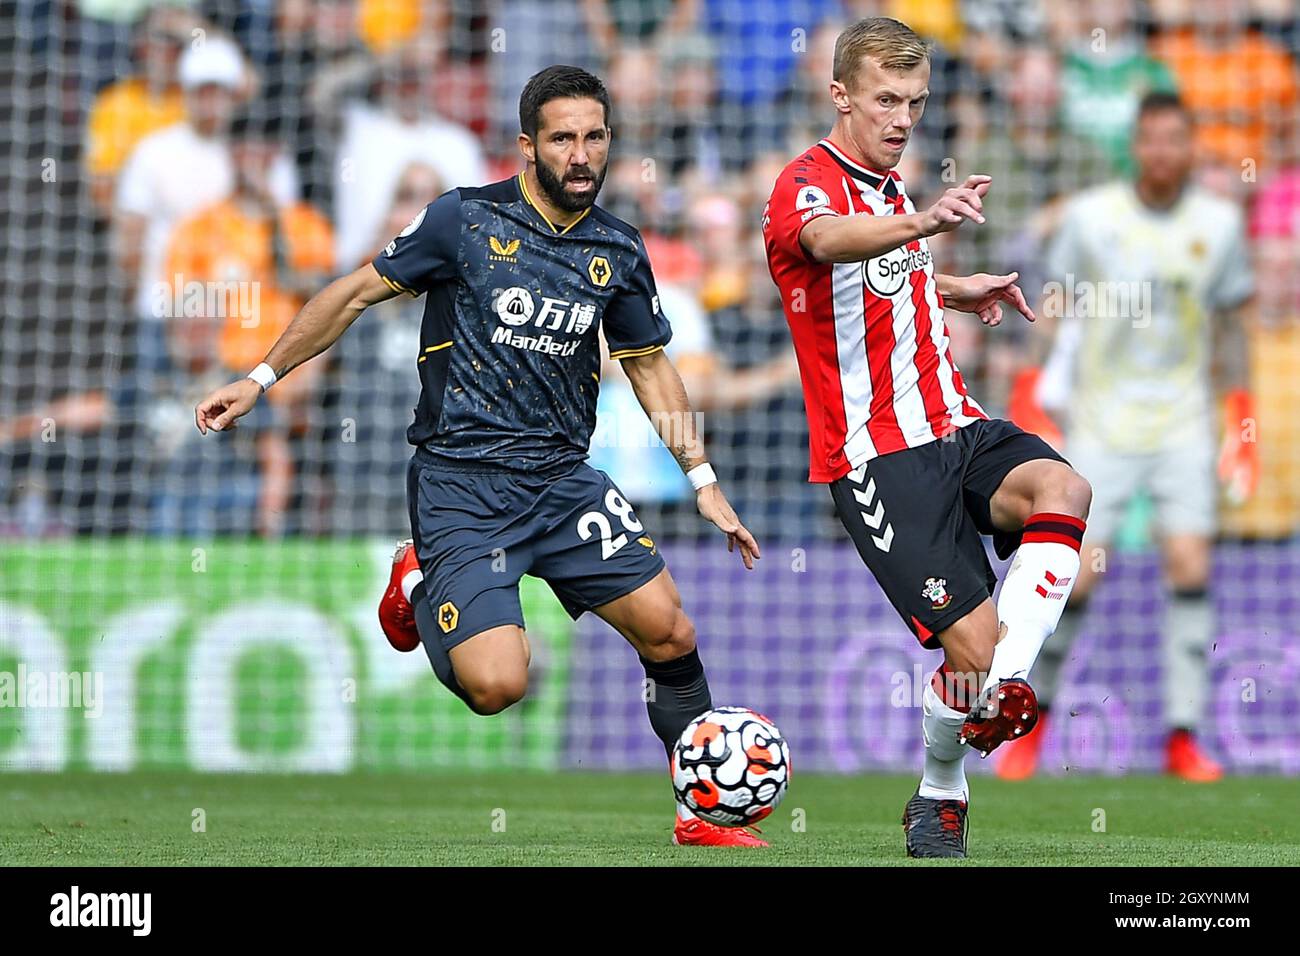 James Ward-Prowse of Southampton and Joao Moutinho of Wolverhampton Wanderers - Southampton v Wolverhampton Wanderers, Premier League, St Mary's Stadium, Southampton, UK - 26th September 2021  Editorial Use Only - DataCo restrictions apply Stock Photo